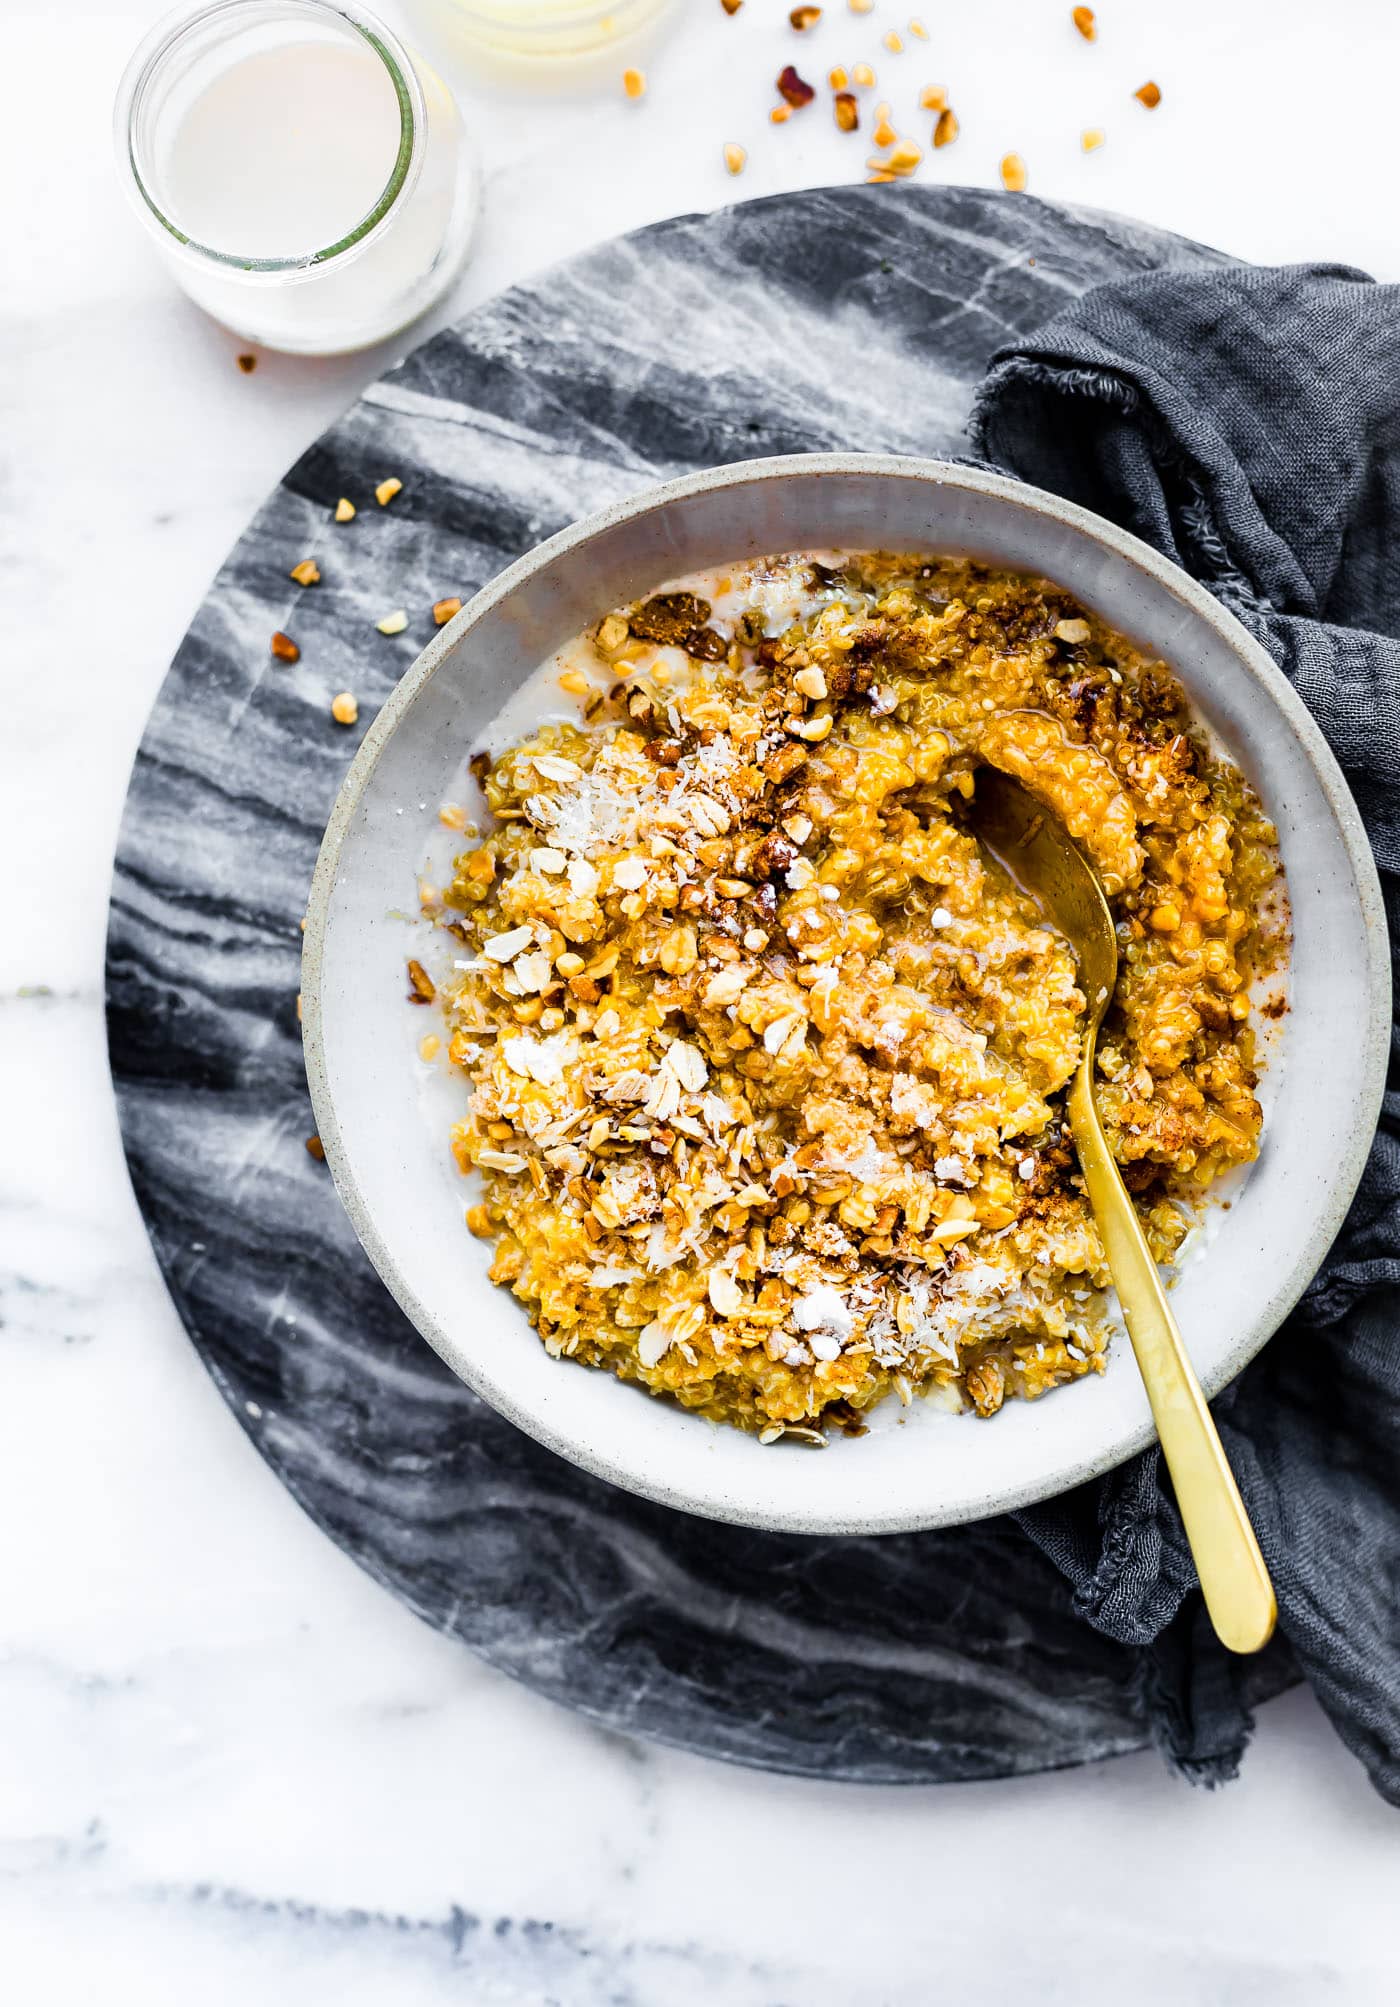 Creamy Pumpkin Quinoa breakfast! A vegan friendly pumpkin quinoa "porridge" recipe perfect for Fall.  Pumpkin puree, quinoa, maple syrup, coconut, nuts, and Coconut Milk add in a balance of healthy fats and plant based protein. This one powerhouse porridge that's easy to make on stove top, Easy to make on stove top, slow cooker, or in a rice cooker, or in a rice cooker. www.cottercrunch.com